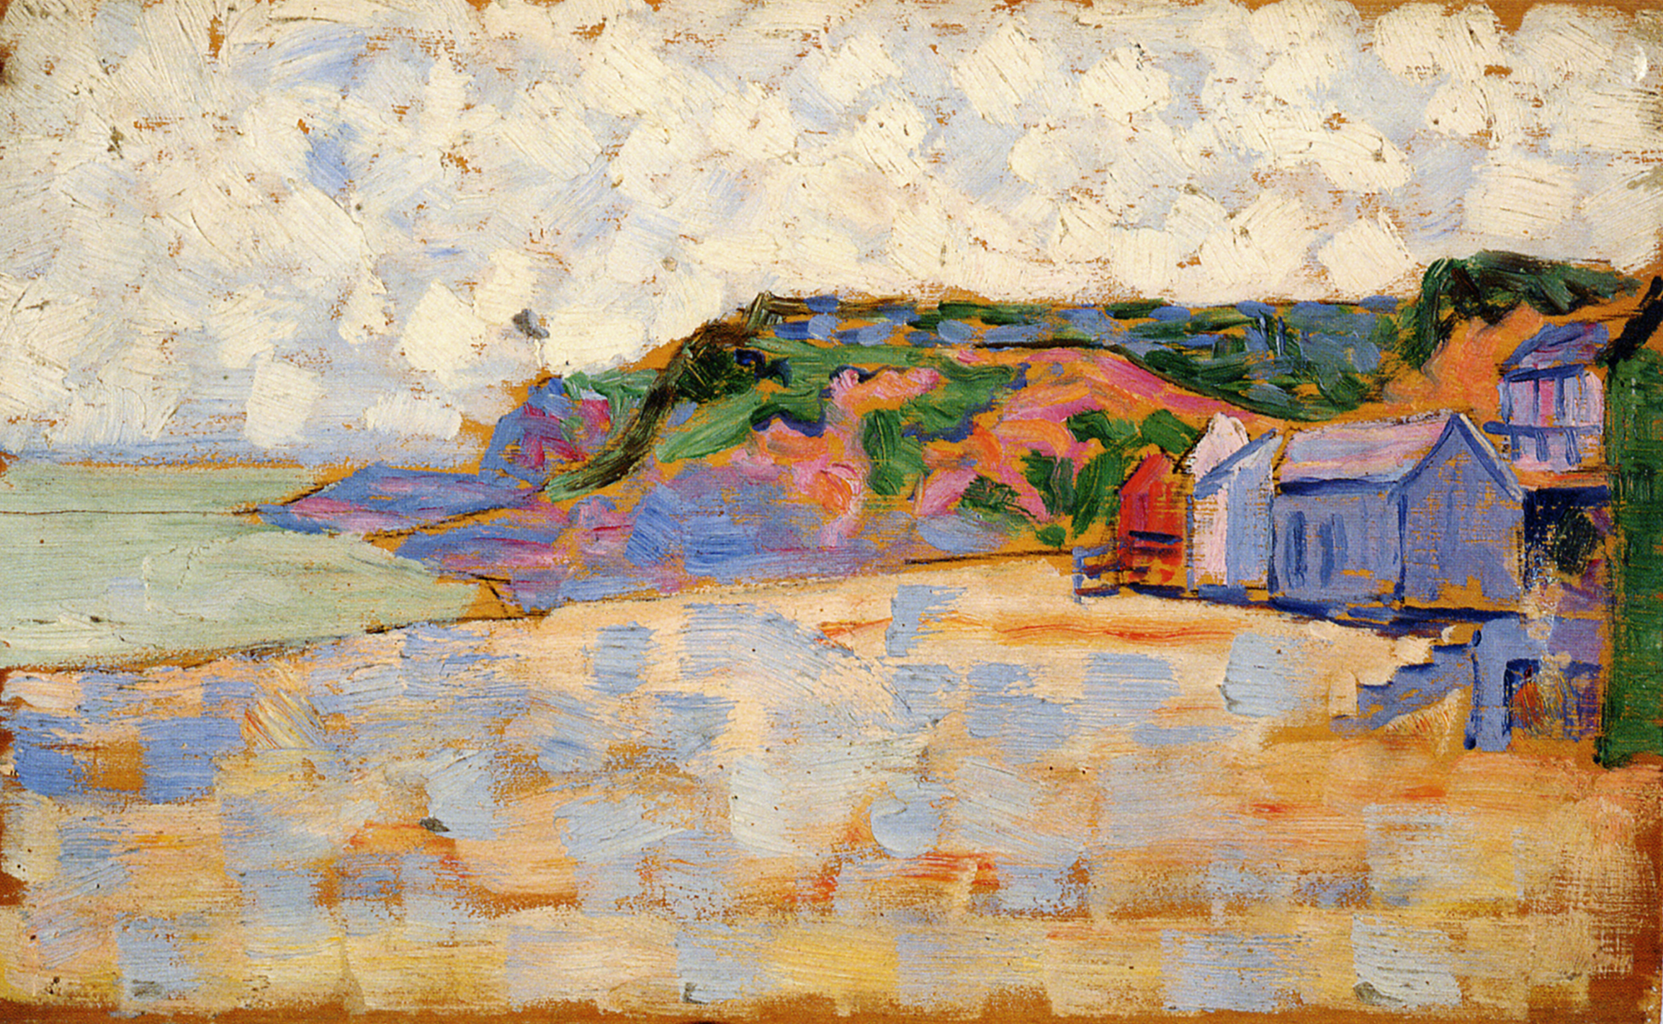 A painting depicting the shore of a beach surrounded by gray cabins a on a sandy beach. In the background, there is a red rocky cliff which is covered with green grass and bushes. Blue rectangular strokes fill up the lower half of the painting while white strokes make up the cloudy sky.